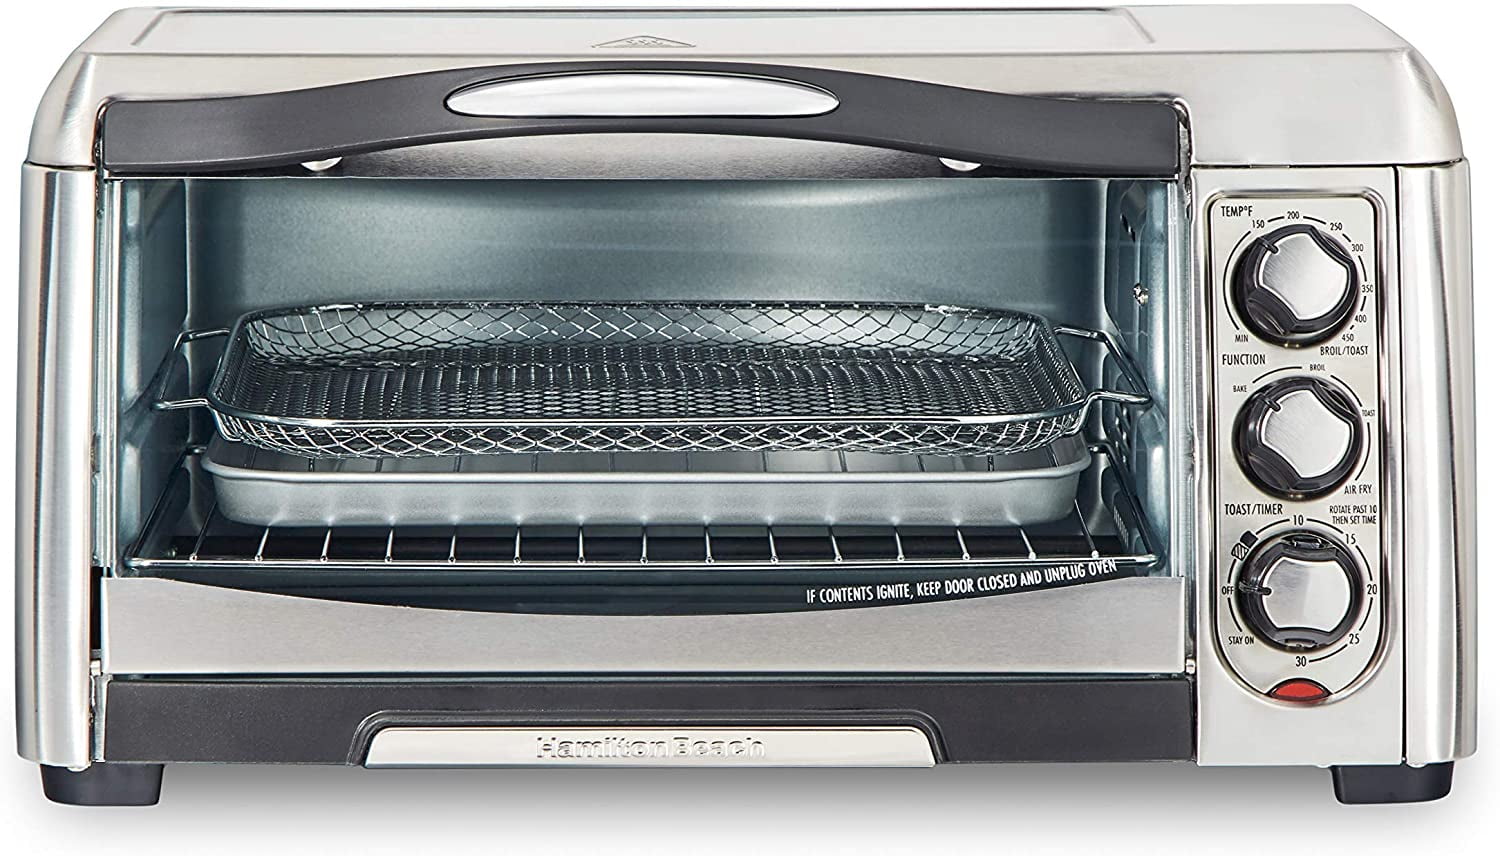 Details about   Koblenz HKM-1500 R 24-Liter Kitchen Magic Collection Oven with Rotisserie 